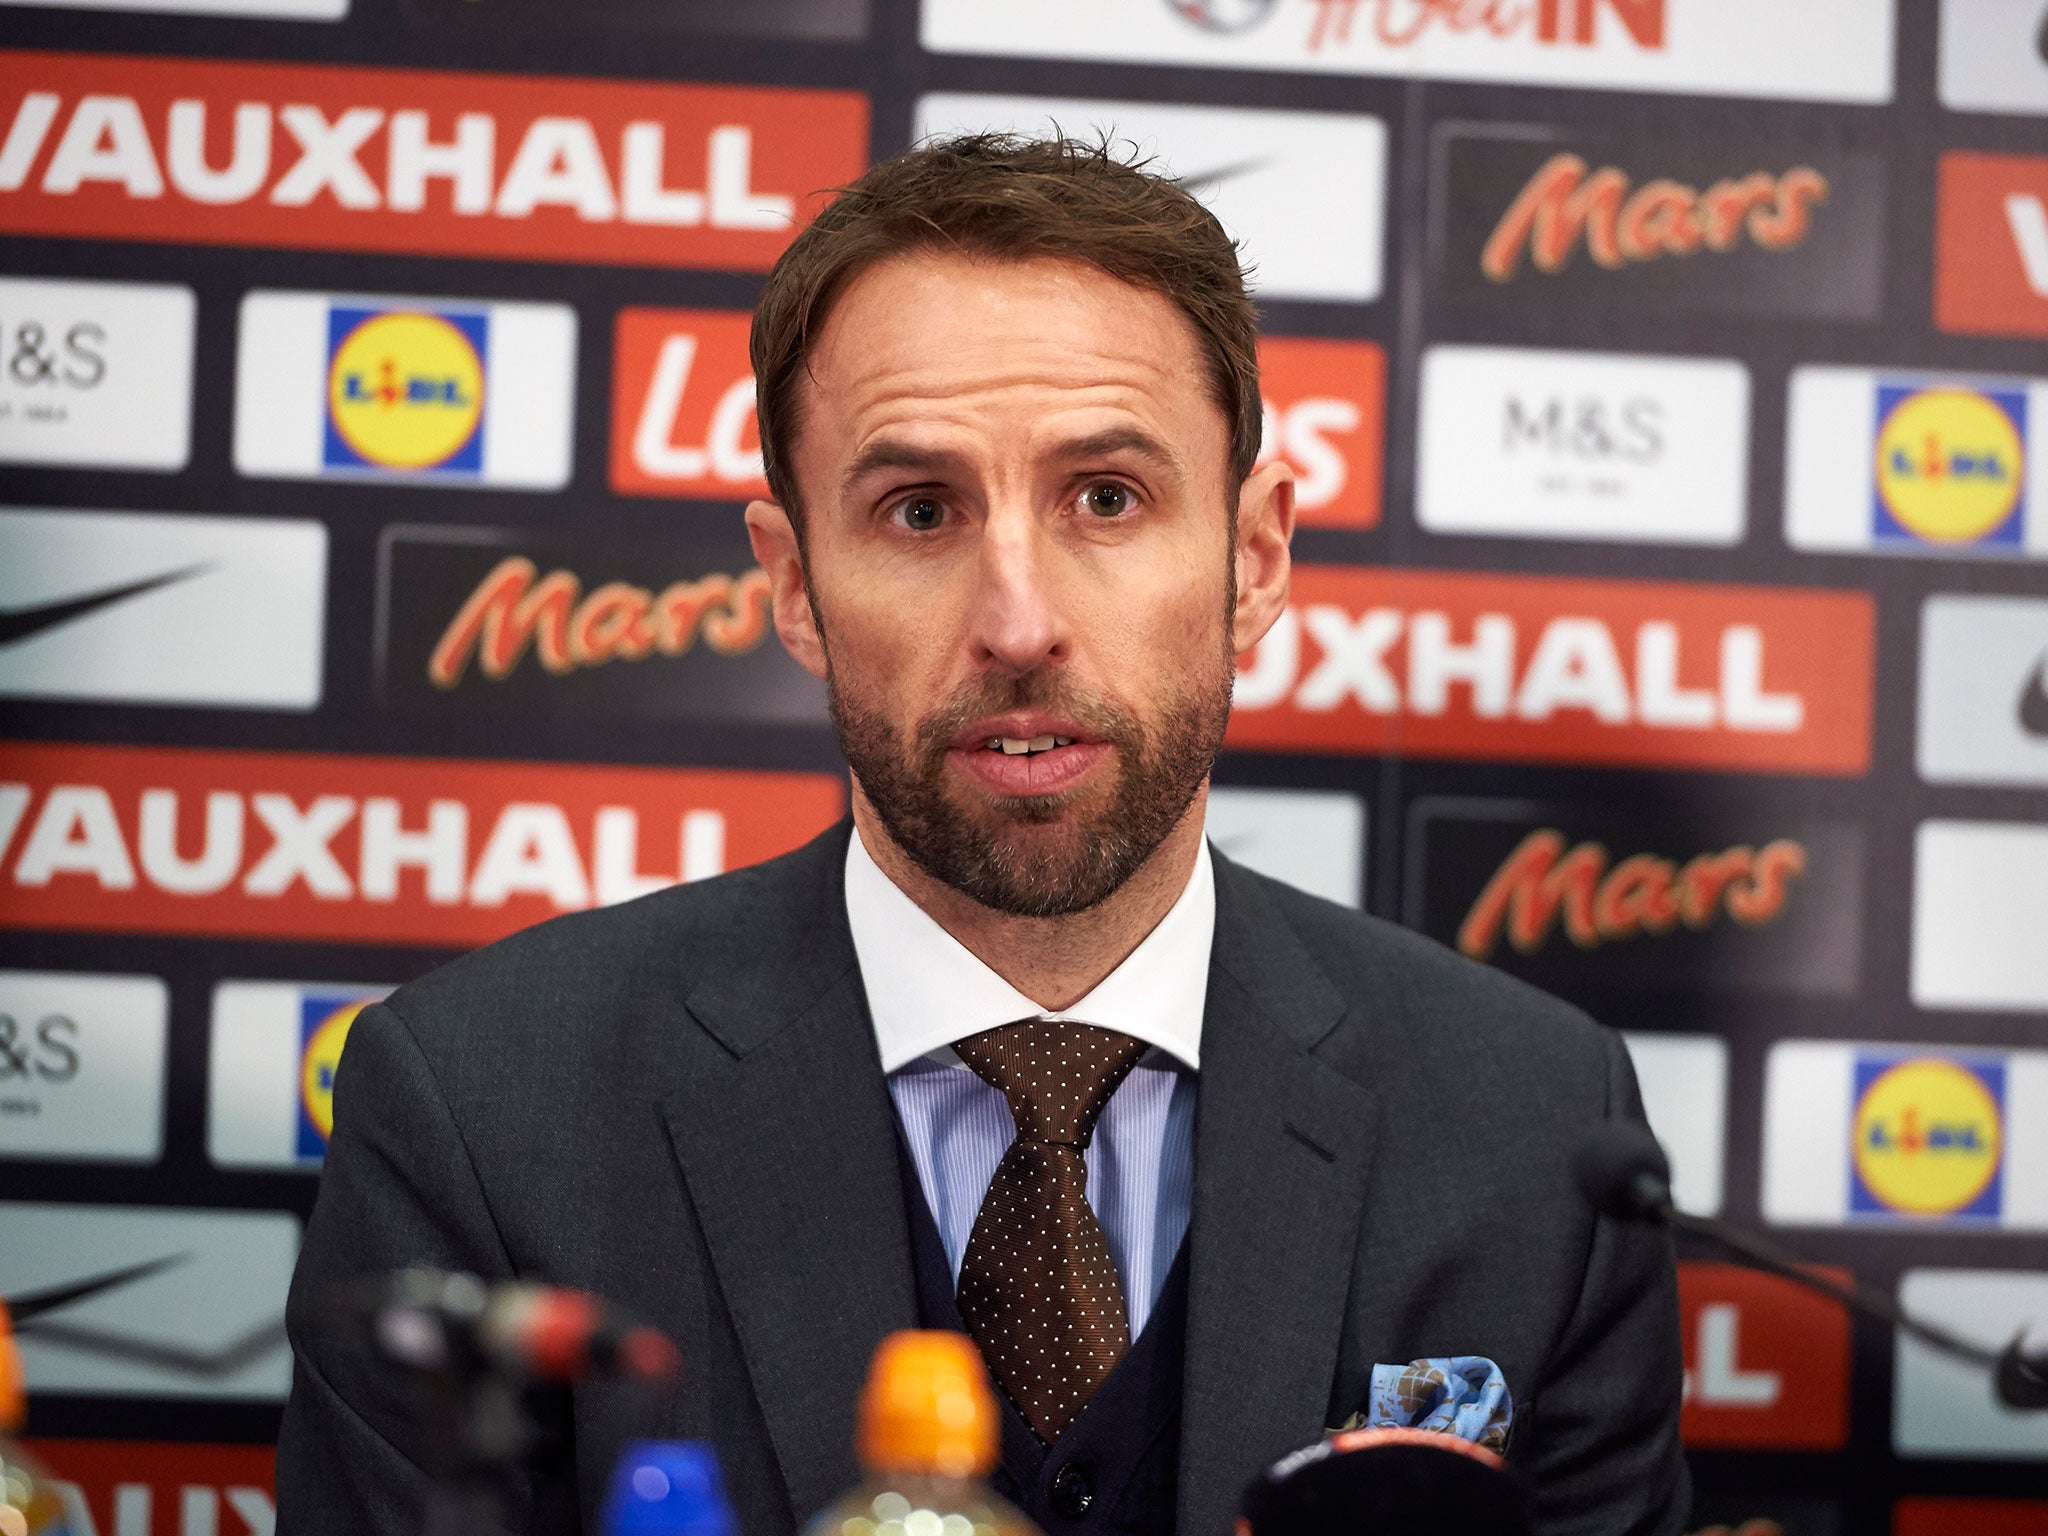 Gareth Southgate addresses the media for the first time after being named the permanent England manager